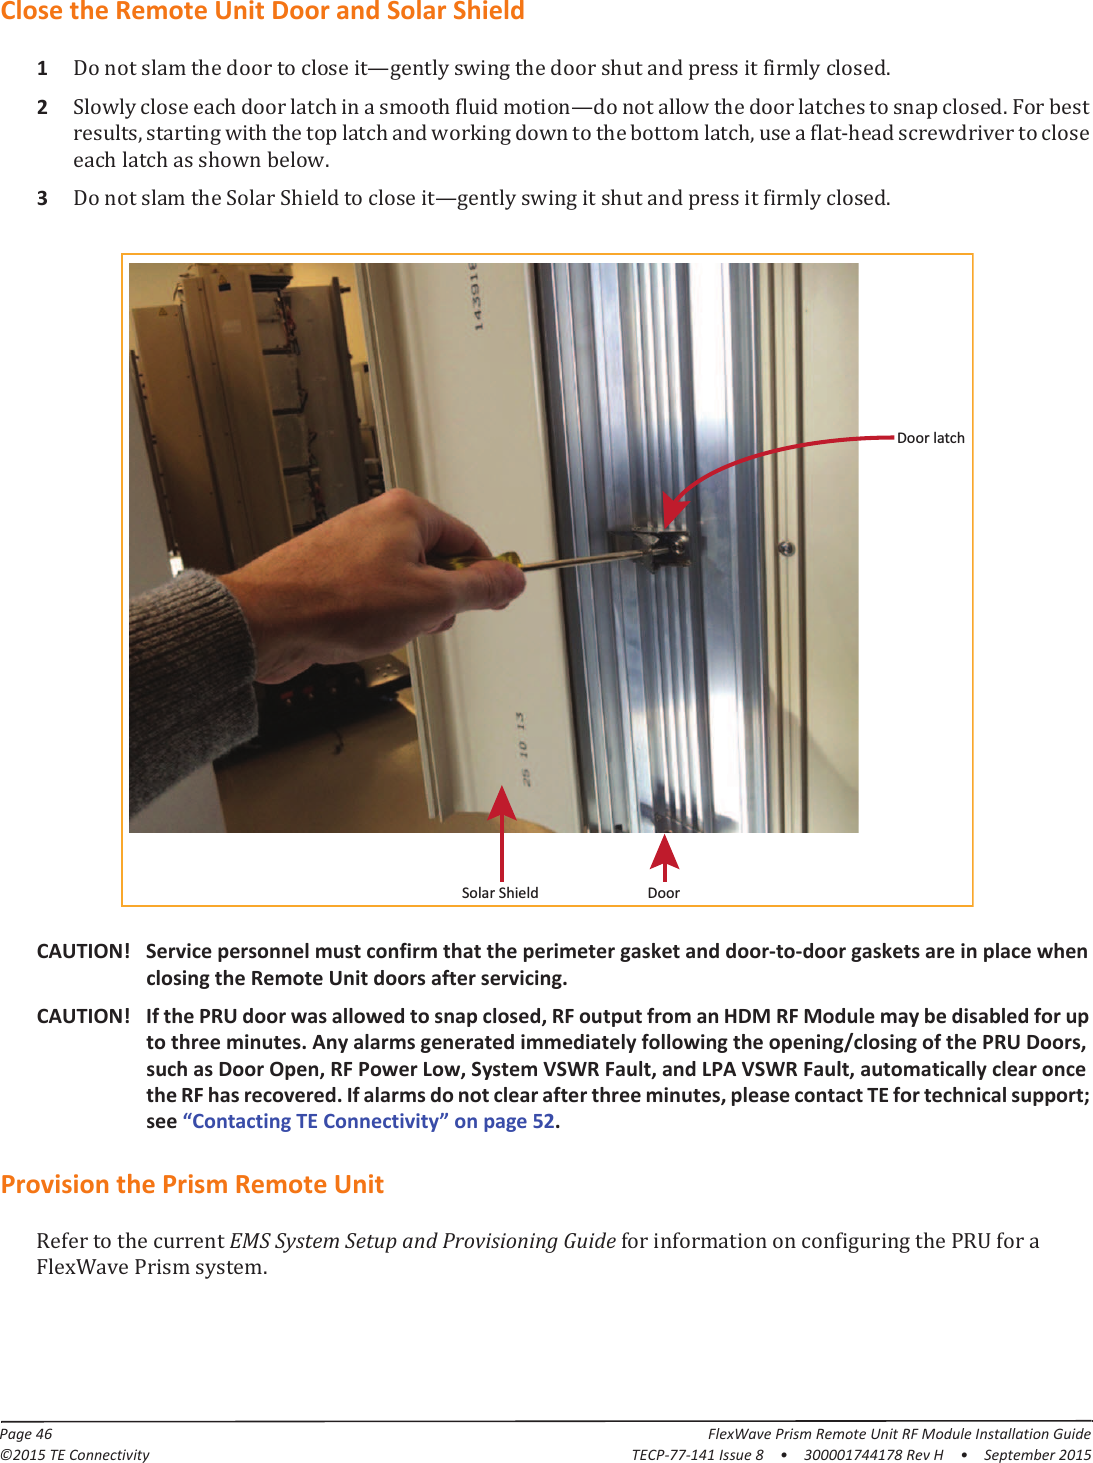 Page 46 FlexWave Prism Remote Unit RF Module Installation Guide©2015 TE Connectivity TECP-77-141 Issue 8  •  300001744178 Rev H  •  September 2015Close the Remote Unit Door and Solar Shield1ȄǤ2ȄǤǡǡǦǤ3ȄǤCAUTION! Service personnel must confirm that the perimeter gasket and door-to-door gaskets are in place when closing the Remote Unit doors after servicing.CAUTION! If the PRU door was allowed to snap closed, RF output from an HDM RF Module may be disabled for up to three minutes. Any alarms generated immediately following the opening/closing of the PRU Doors, such as Door Open, RF Power Low, System VSWR Fault, and LPA VSWR Fault, automatically clear once the RF has recovered. If alarms do not clear after three minutes, please contact TE for technical support; see “Contacting TE Connectivity” on page 52.Provision the Prism Remote Unit EMS System Setup and Provisioning Guide ǤSolar Shield DoorDoor latch